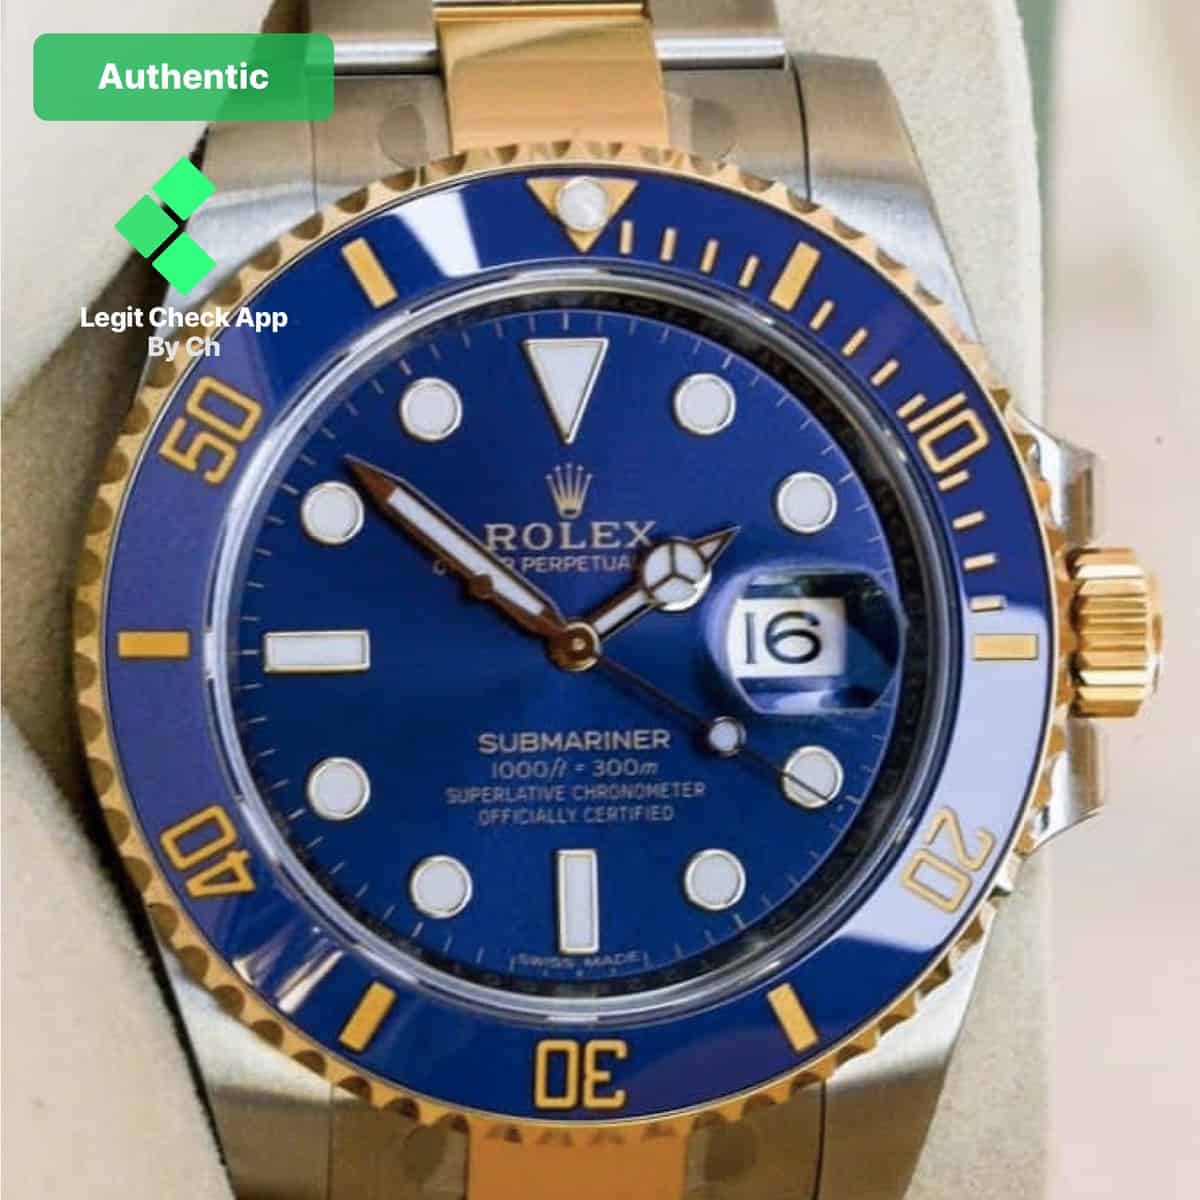 How To Spot Fake Rolex Submariner - Real Vs Fake Rolex Submariner ...